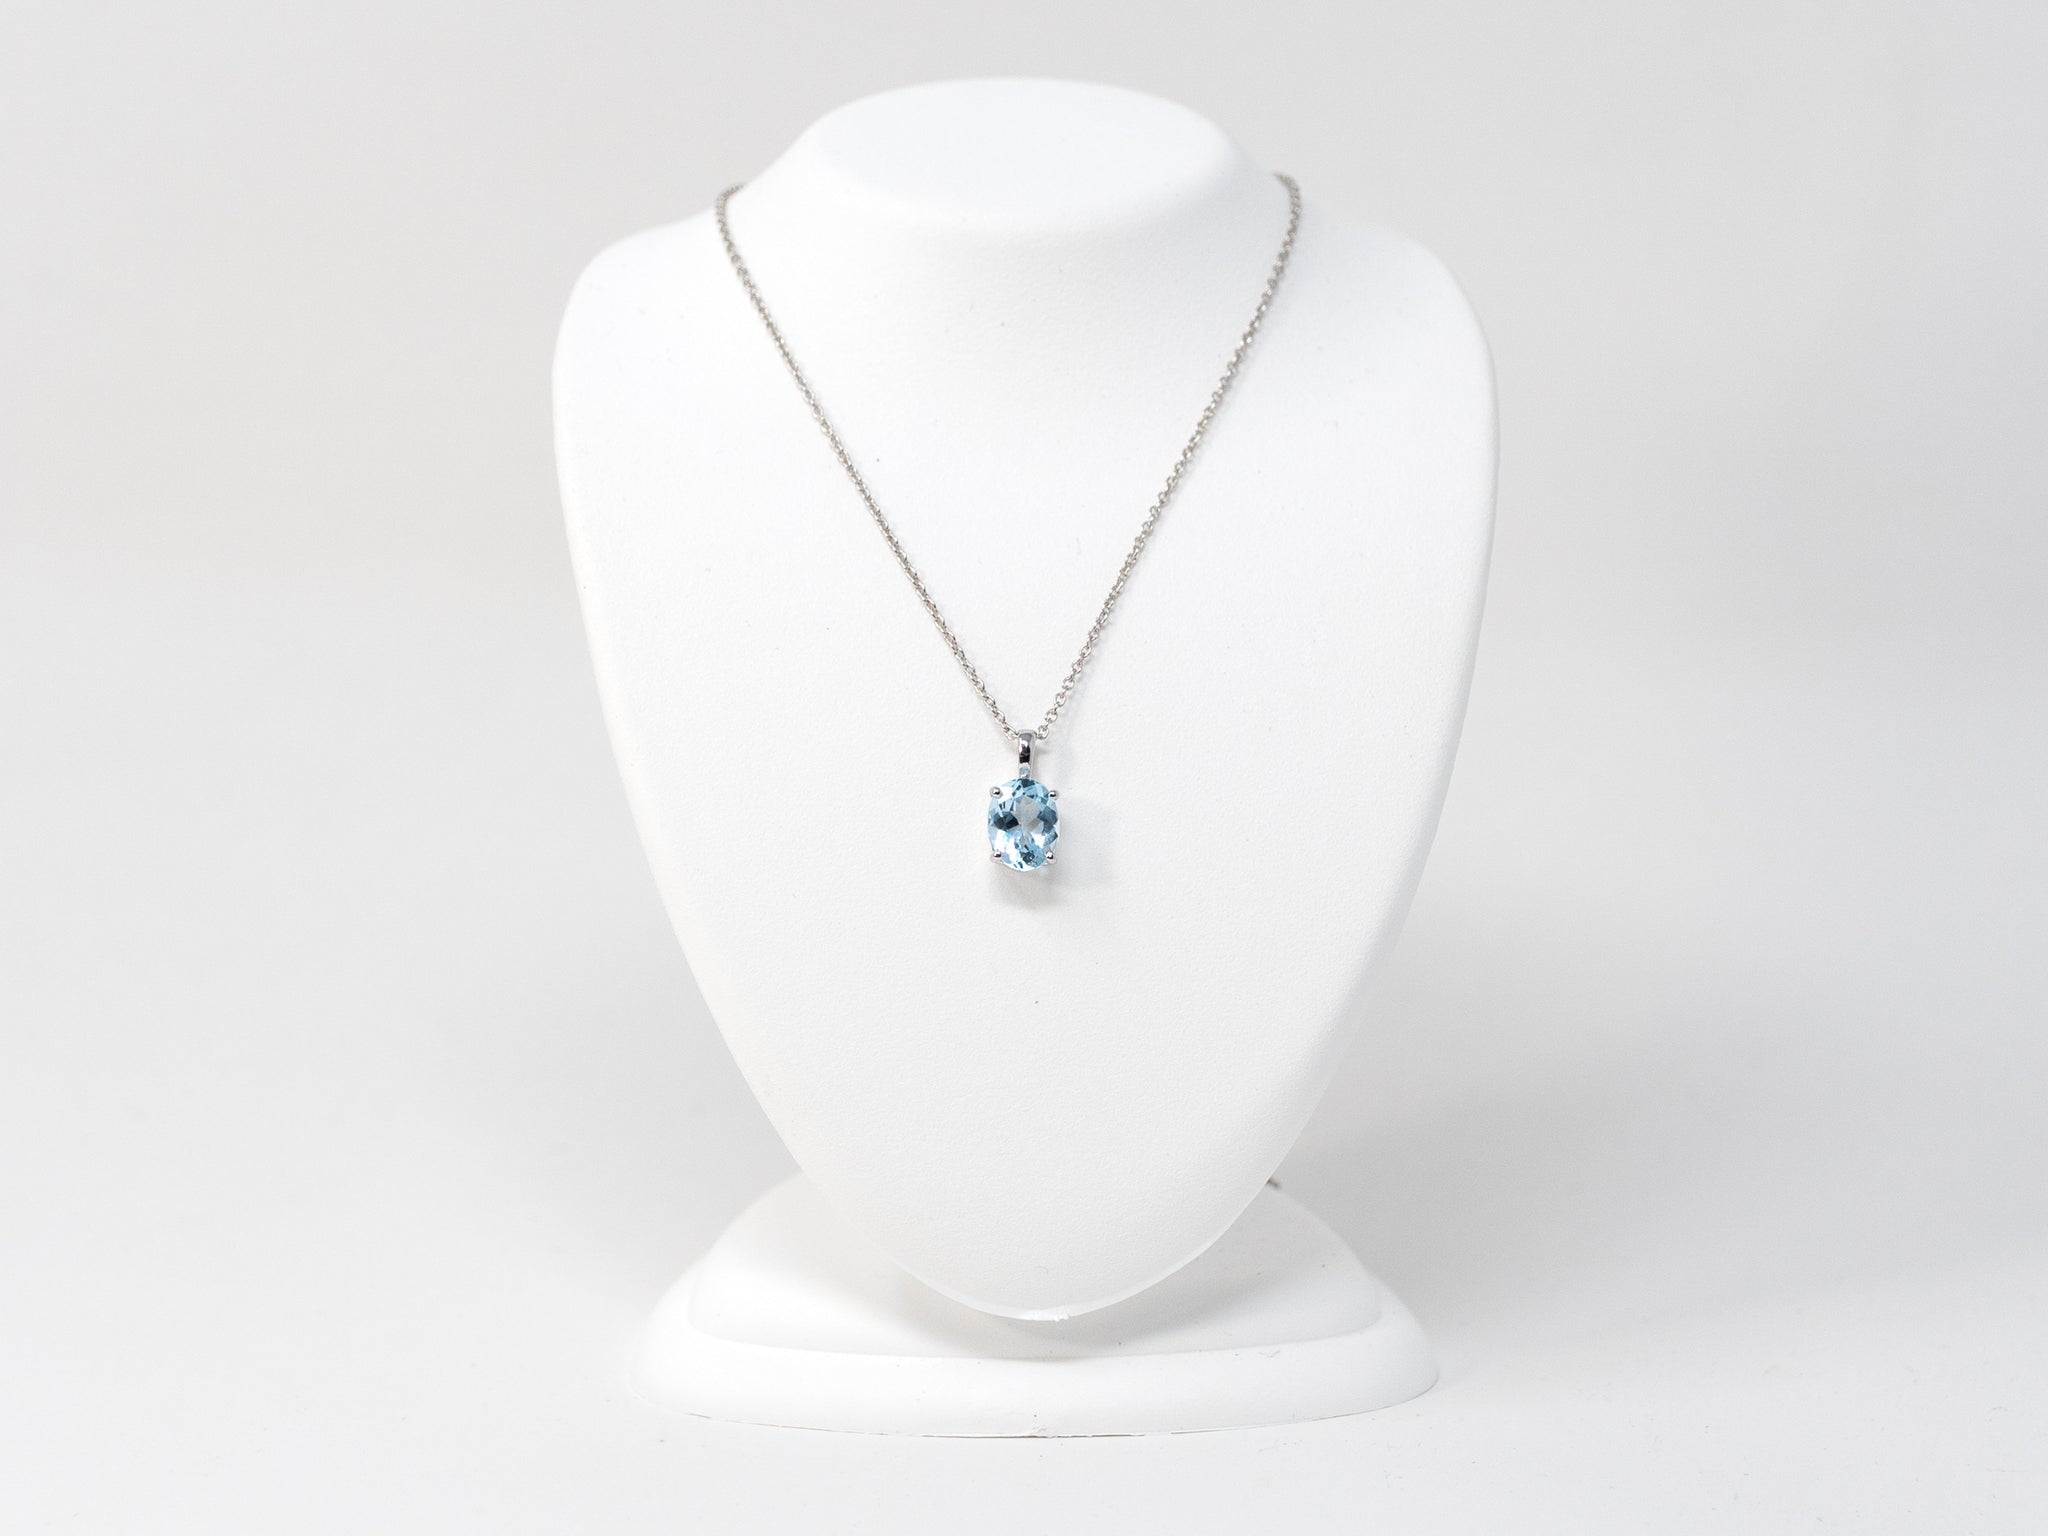 Oval 2 ct. Blue Topaz Basket Set Pendant with 18" Chain in Sterling Silver